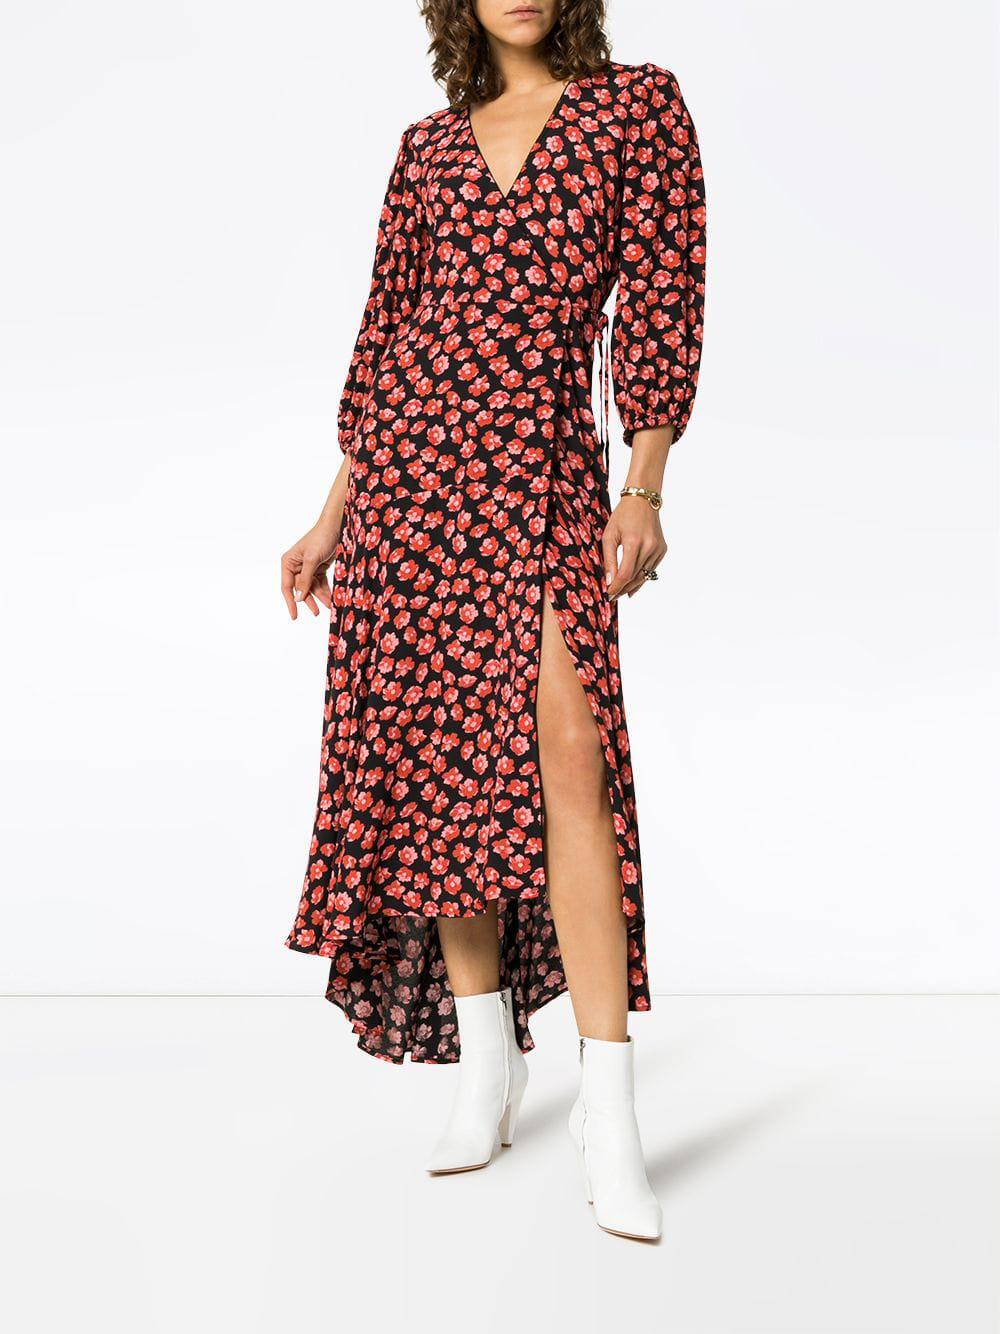 Ganni Leather Floral Print Wrap Midi Dress in Black/Red (Red) | Lyst